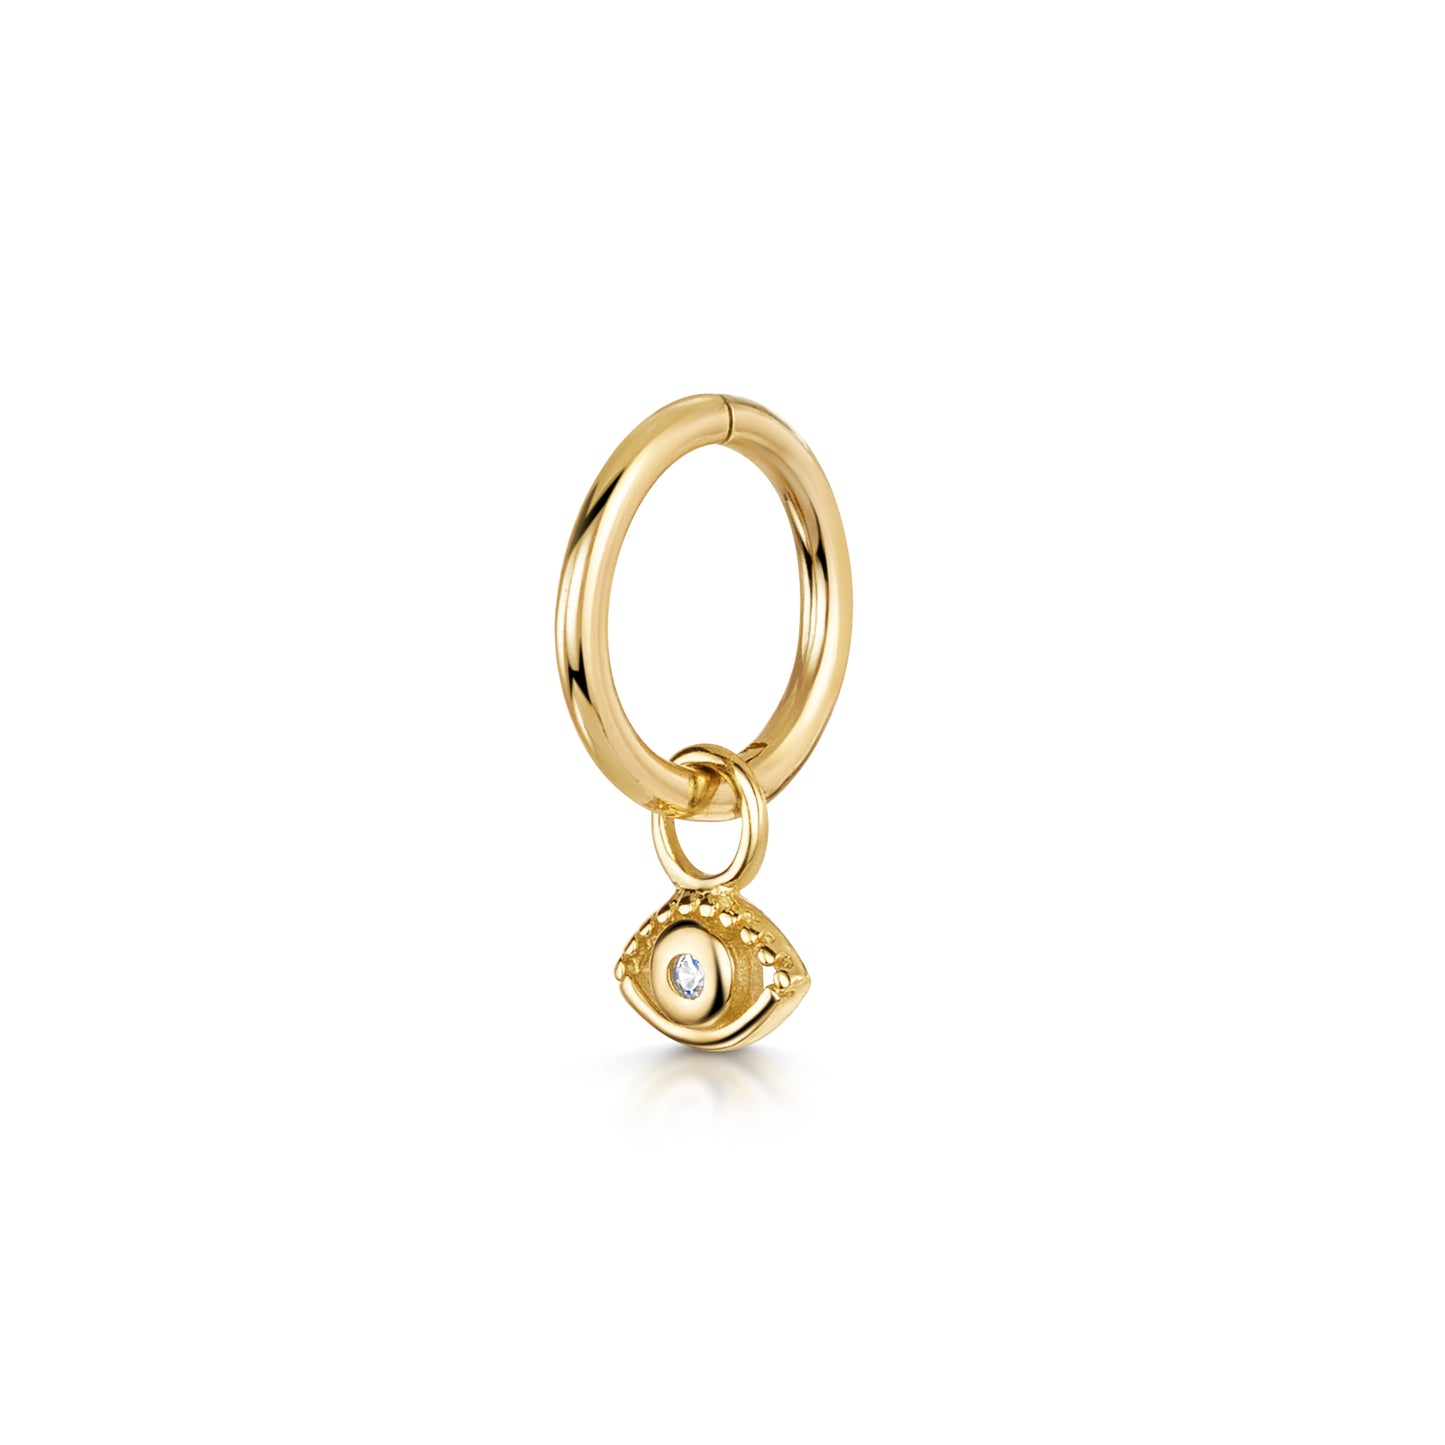 9k solid yellow gold 6mm 18g clicker hoop earring with mystic eye charm